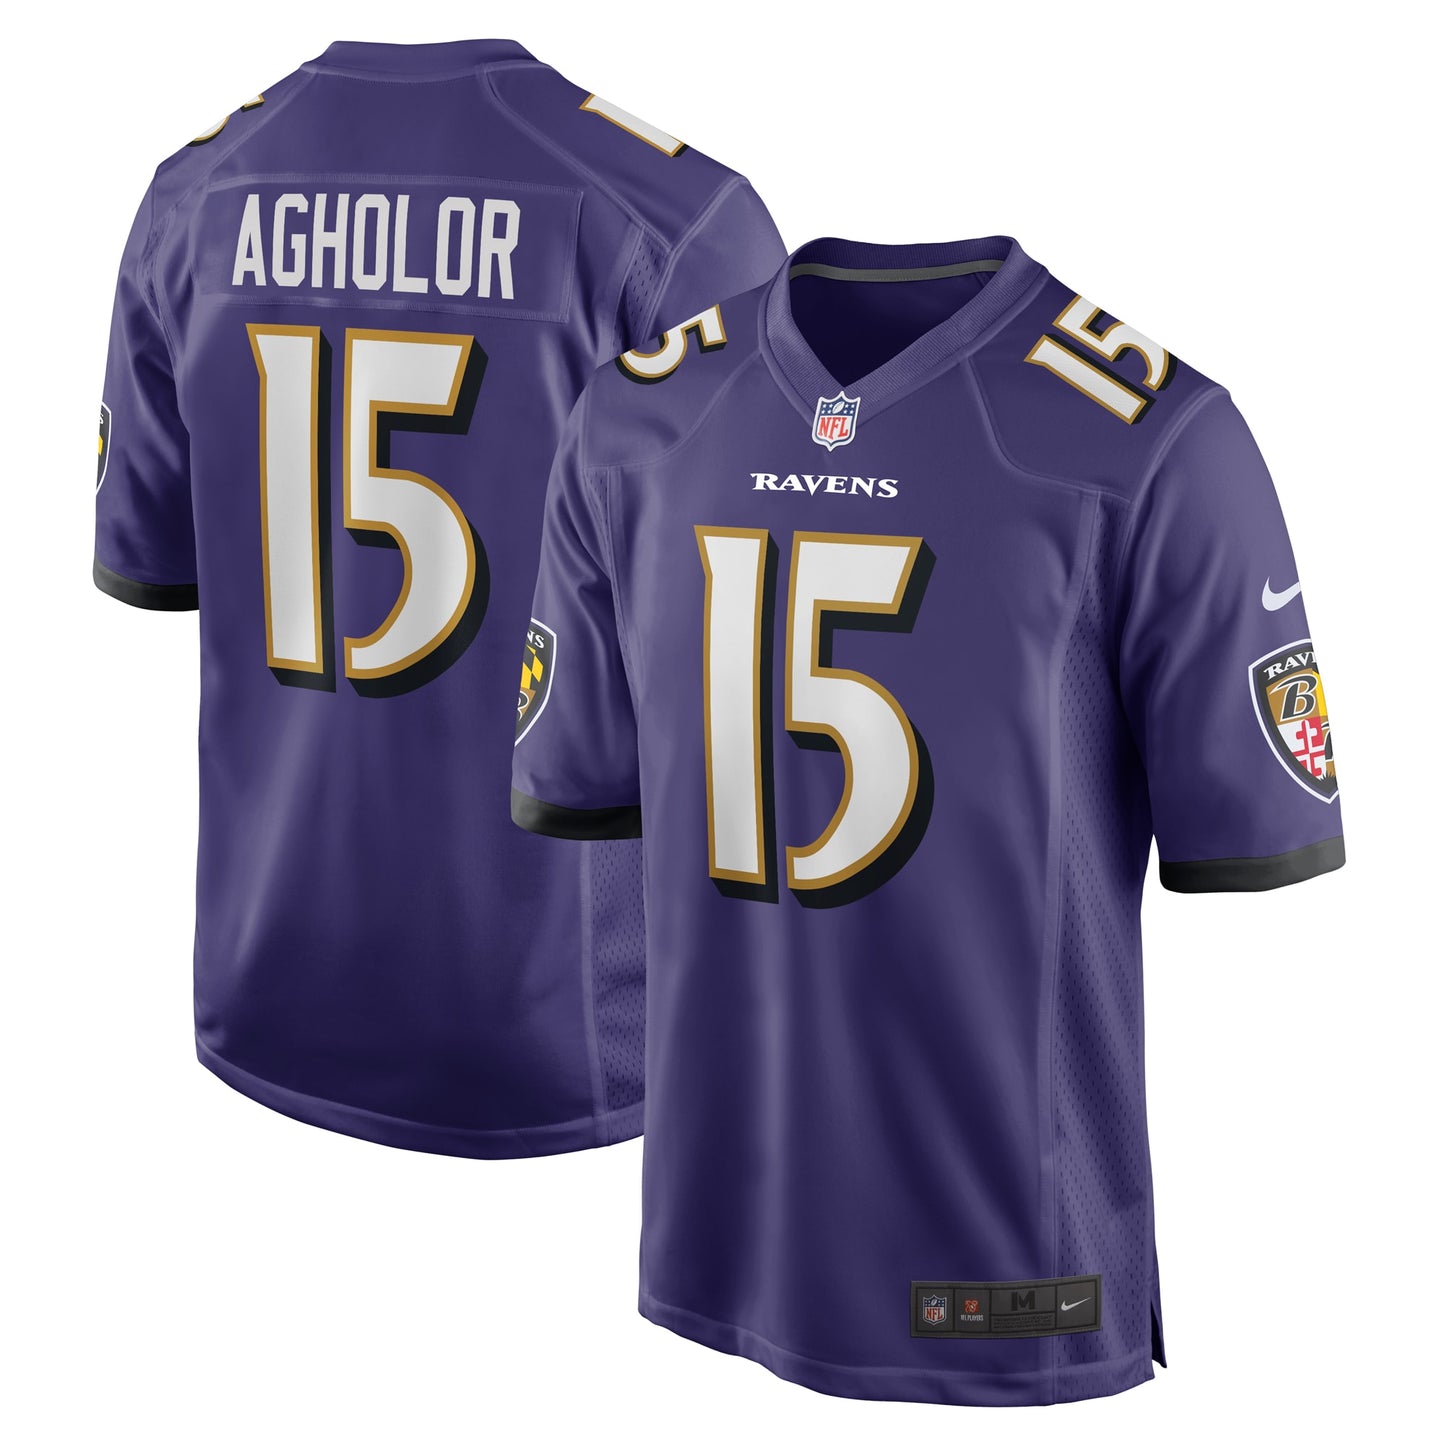 Nelson Agholor Baltimore Ravens Nike Game Jersey - Purple